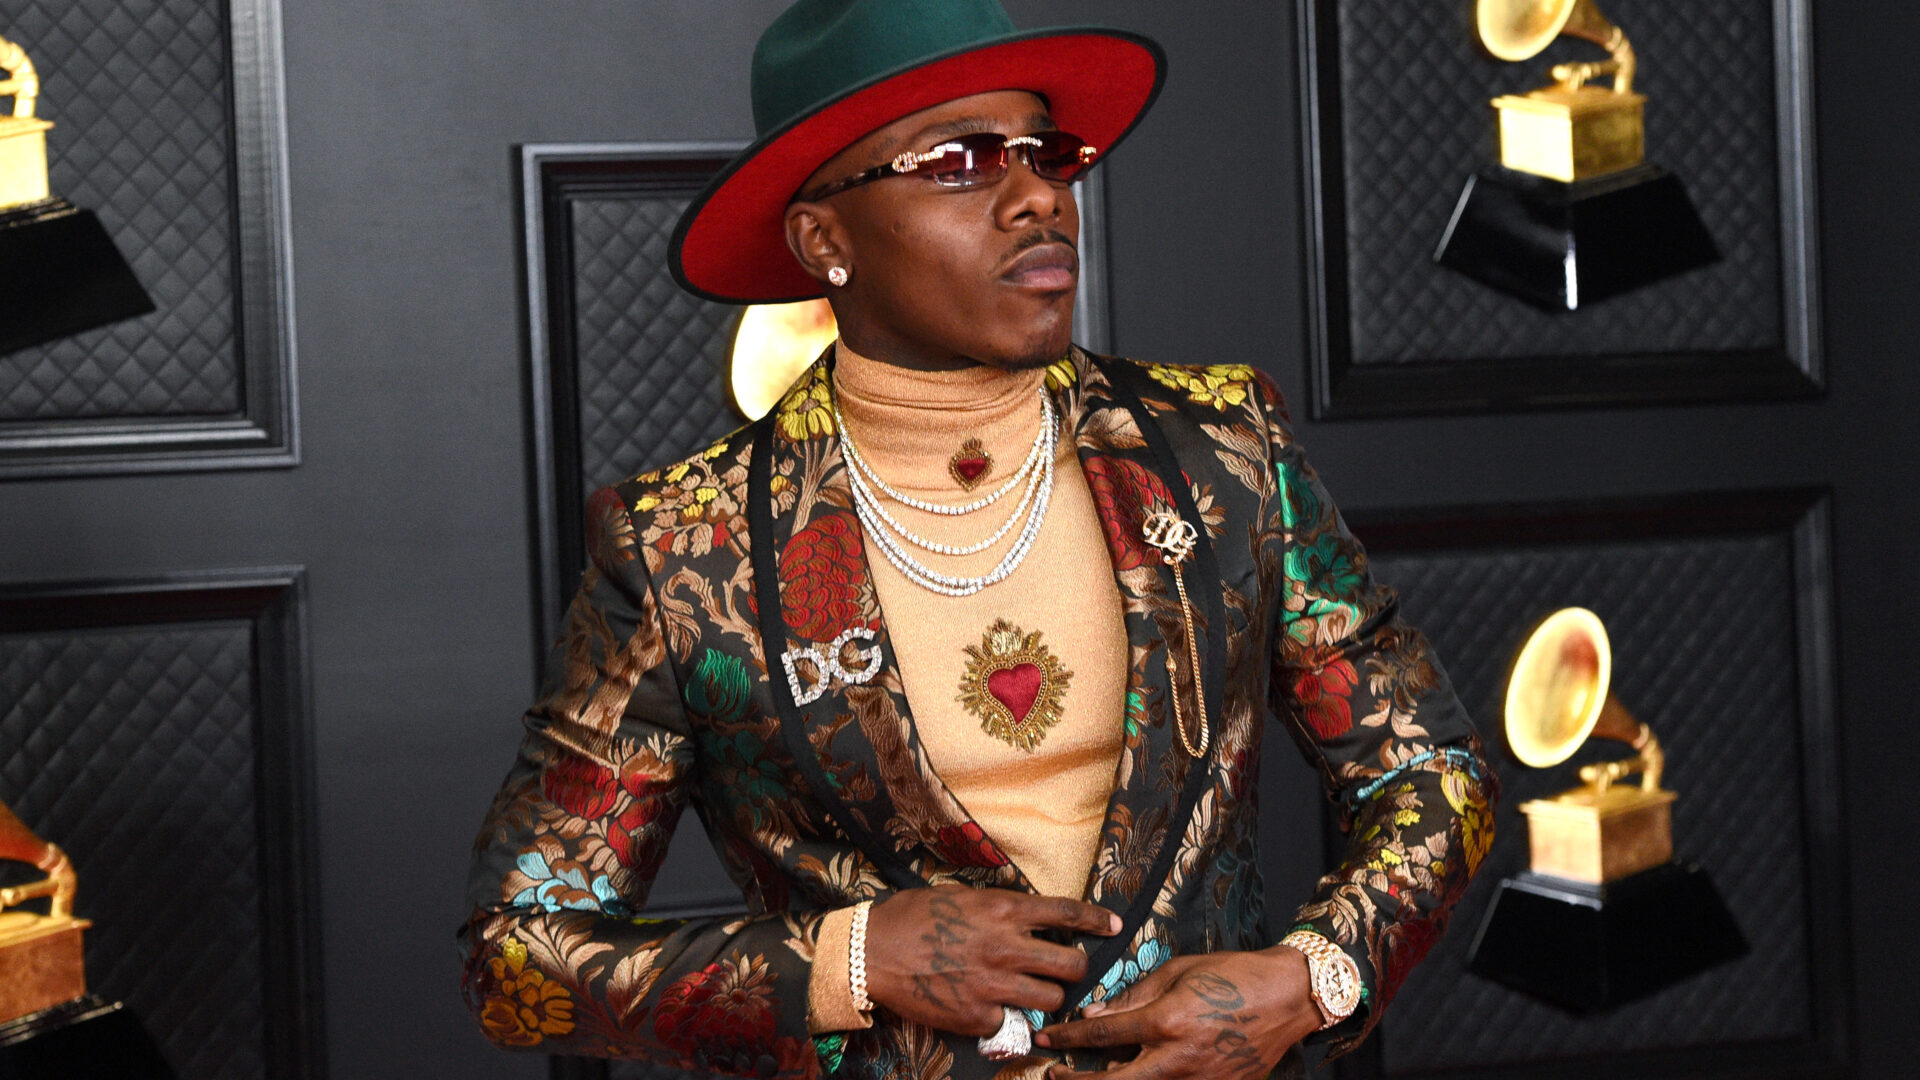 DaBaby Issues Apology After Making Homophobic Remarks